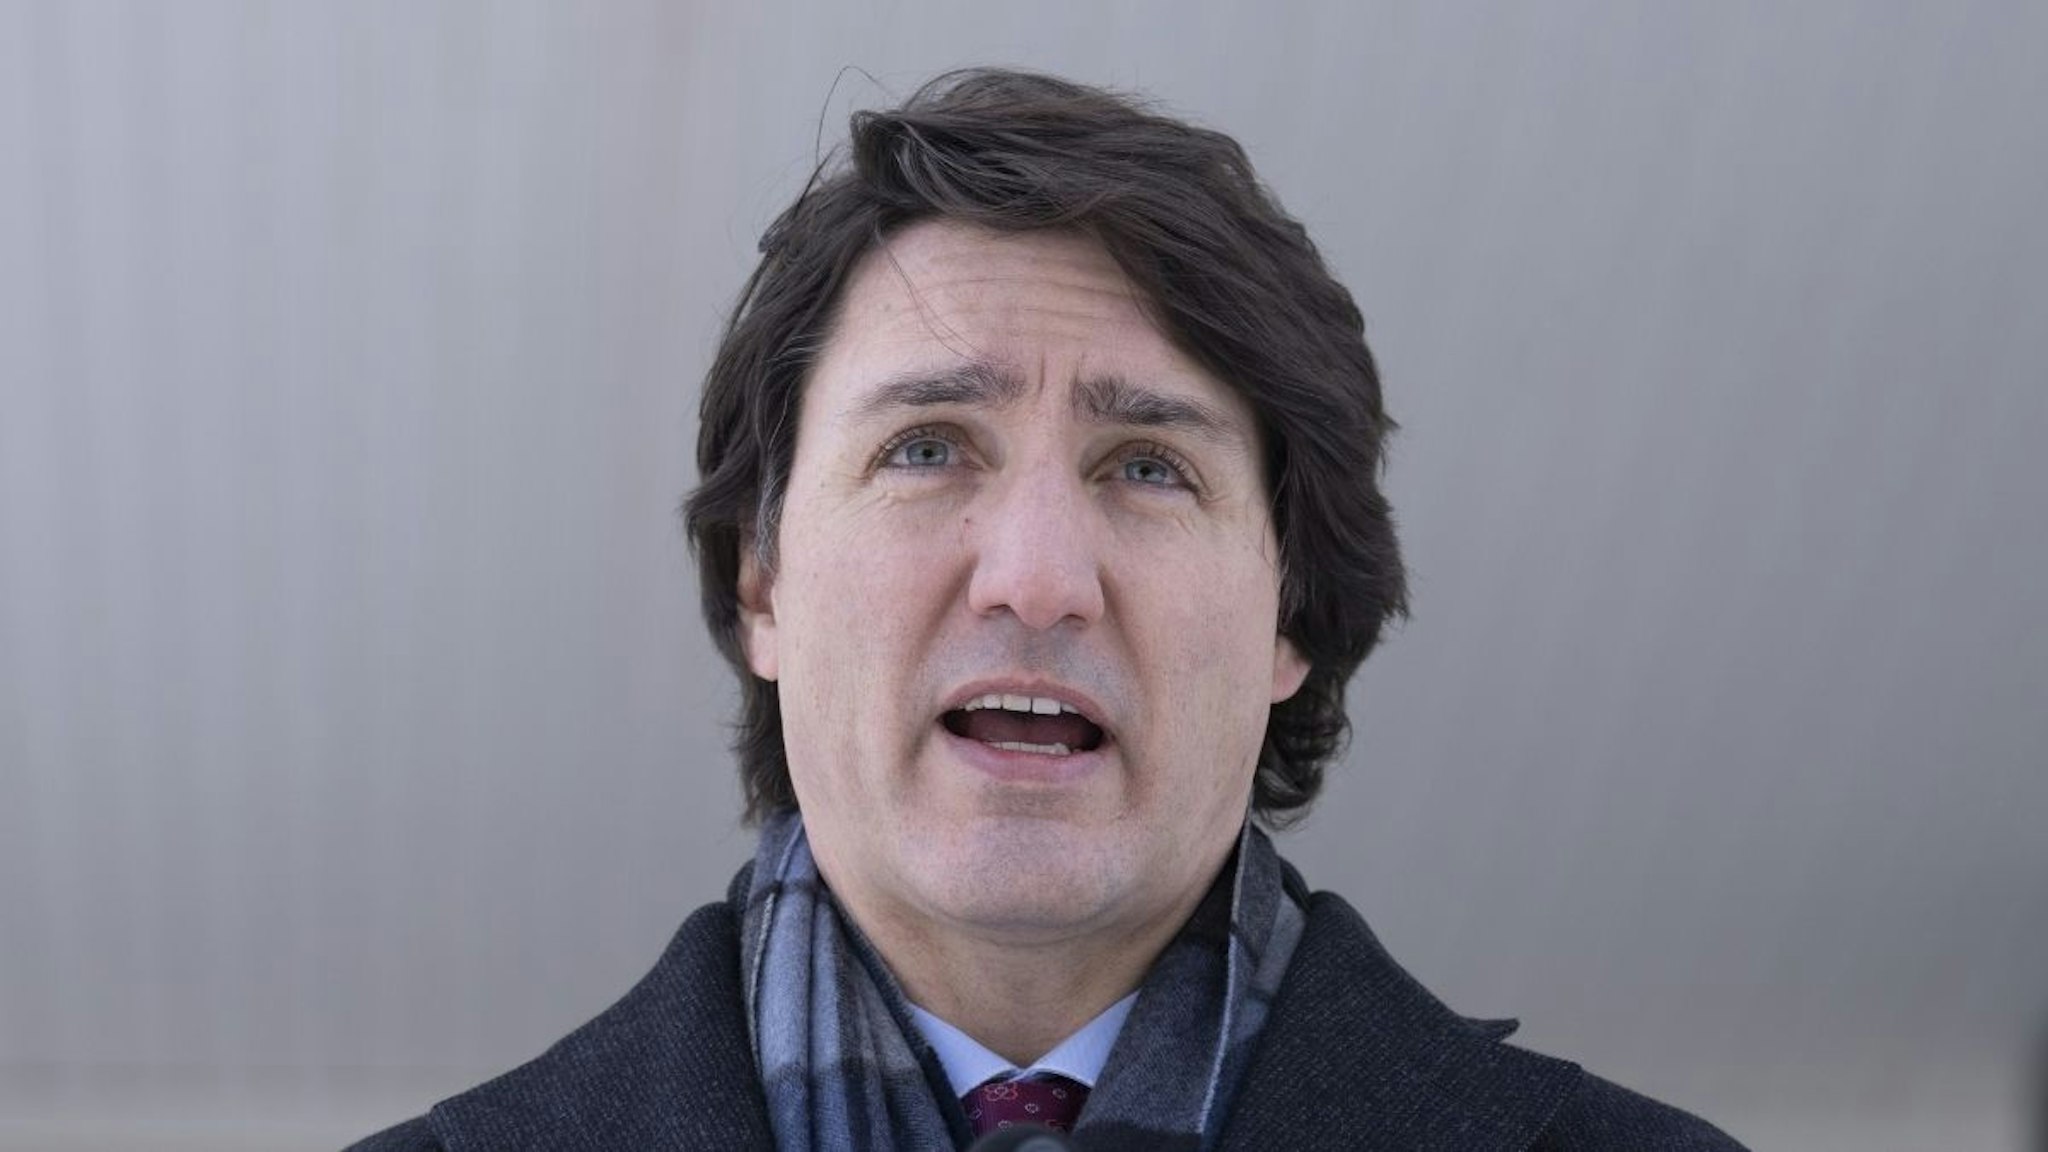 Justin Trudeau, Canadas prime minister, speaks during a news conference from the National Capital Region in Canada on Monday, Jan. 31, 2022.